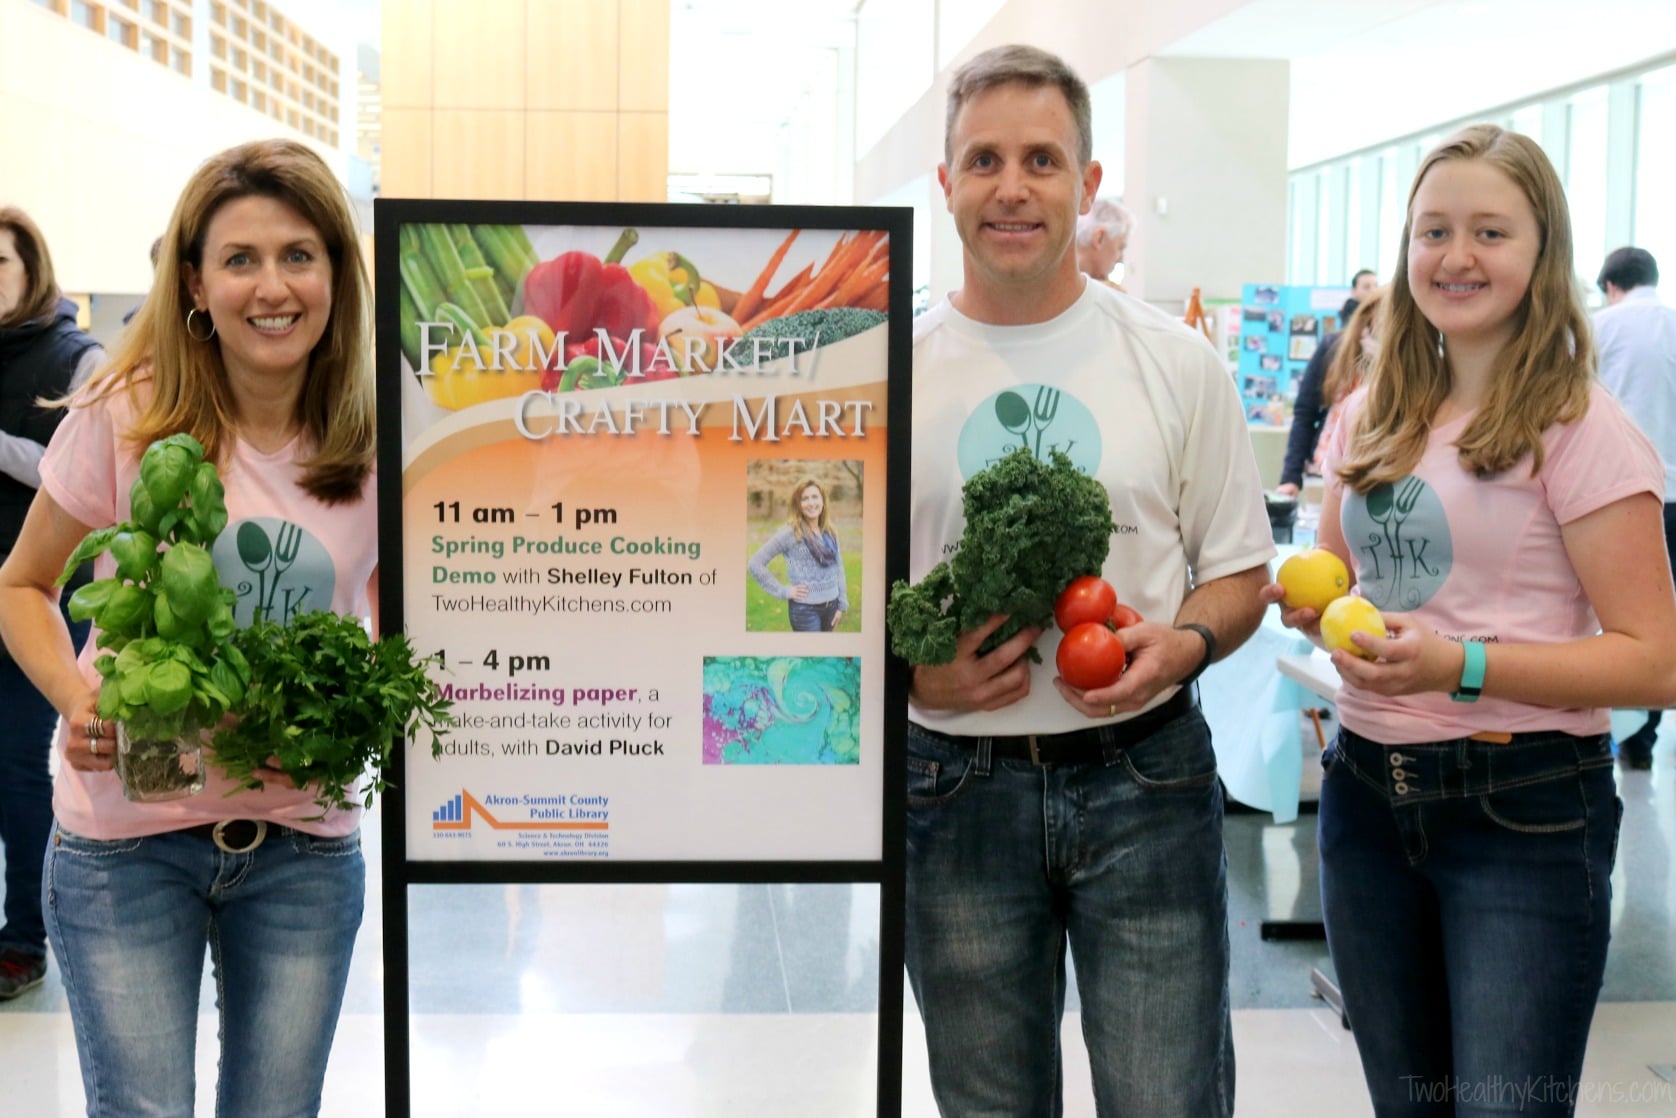 Shelley, Scott and Amy wearing THK logo t-shirts and holding tabouli ingredients next to sign advertising Farm Market.